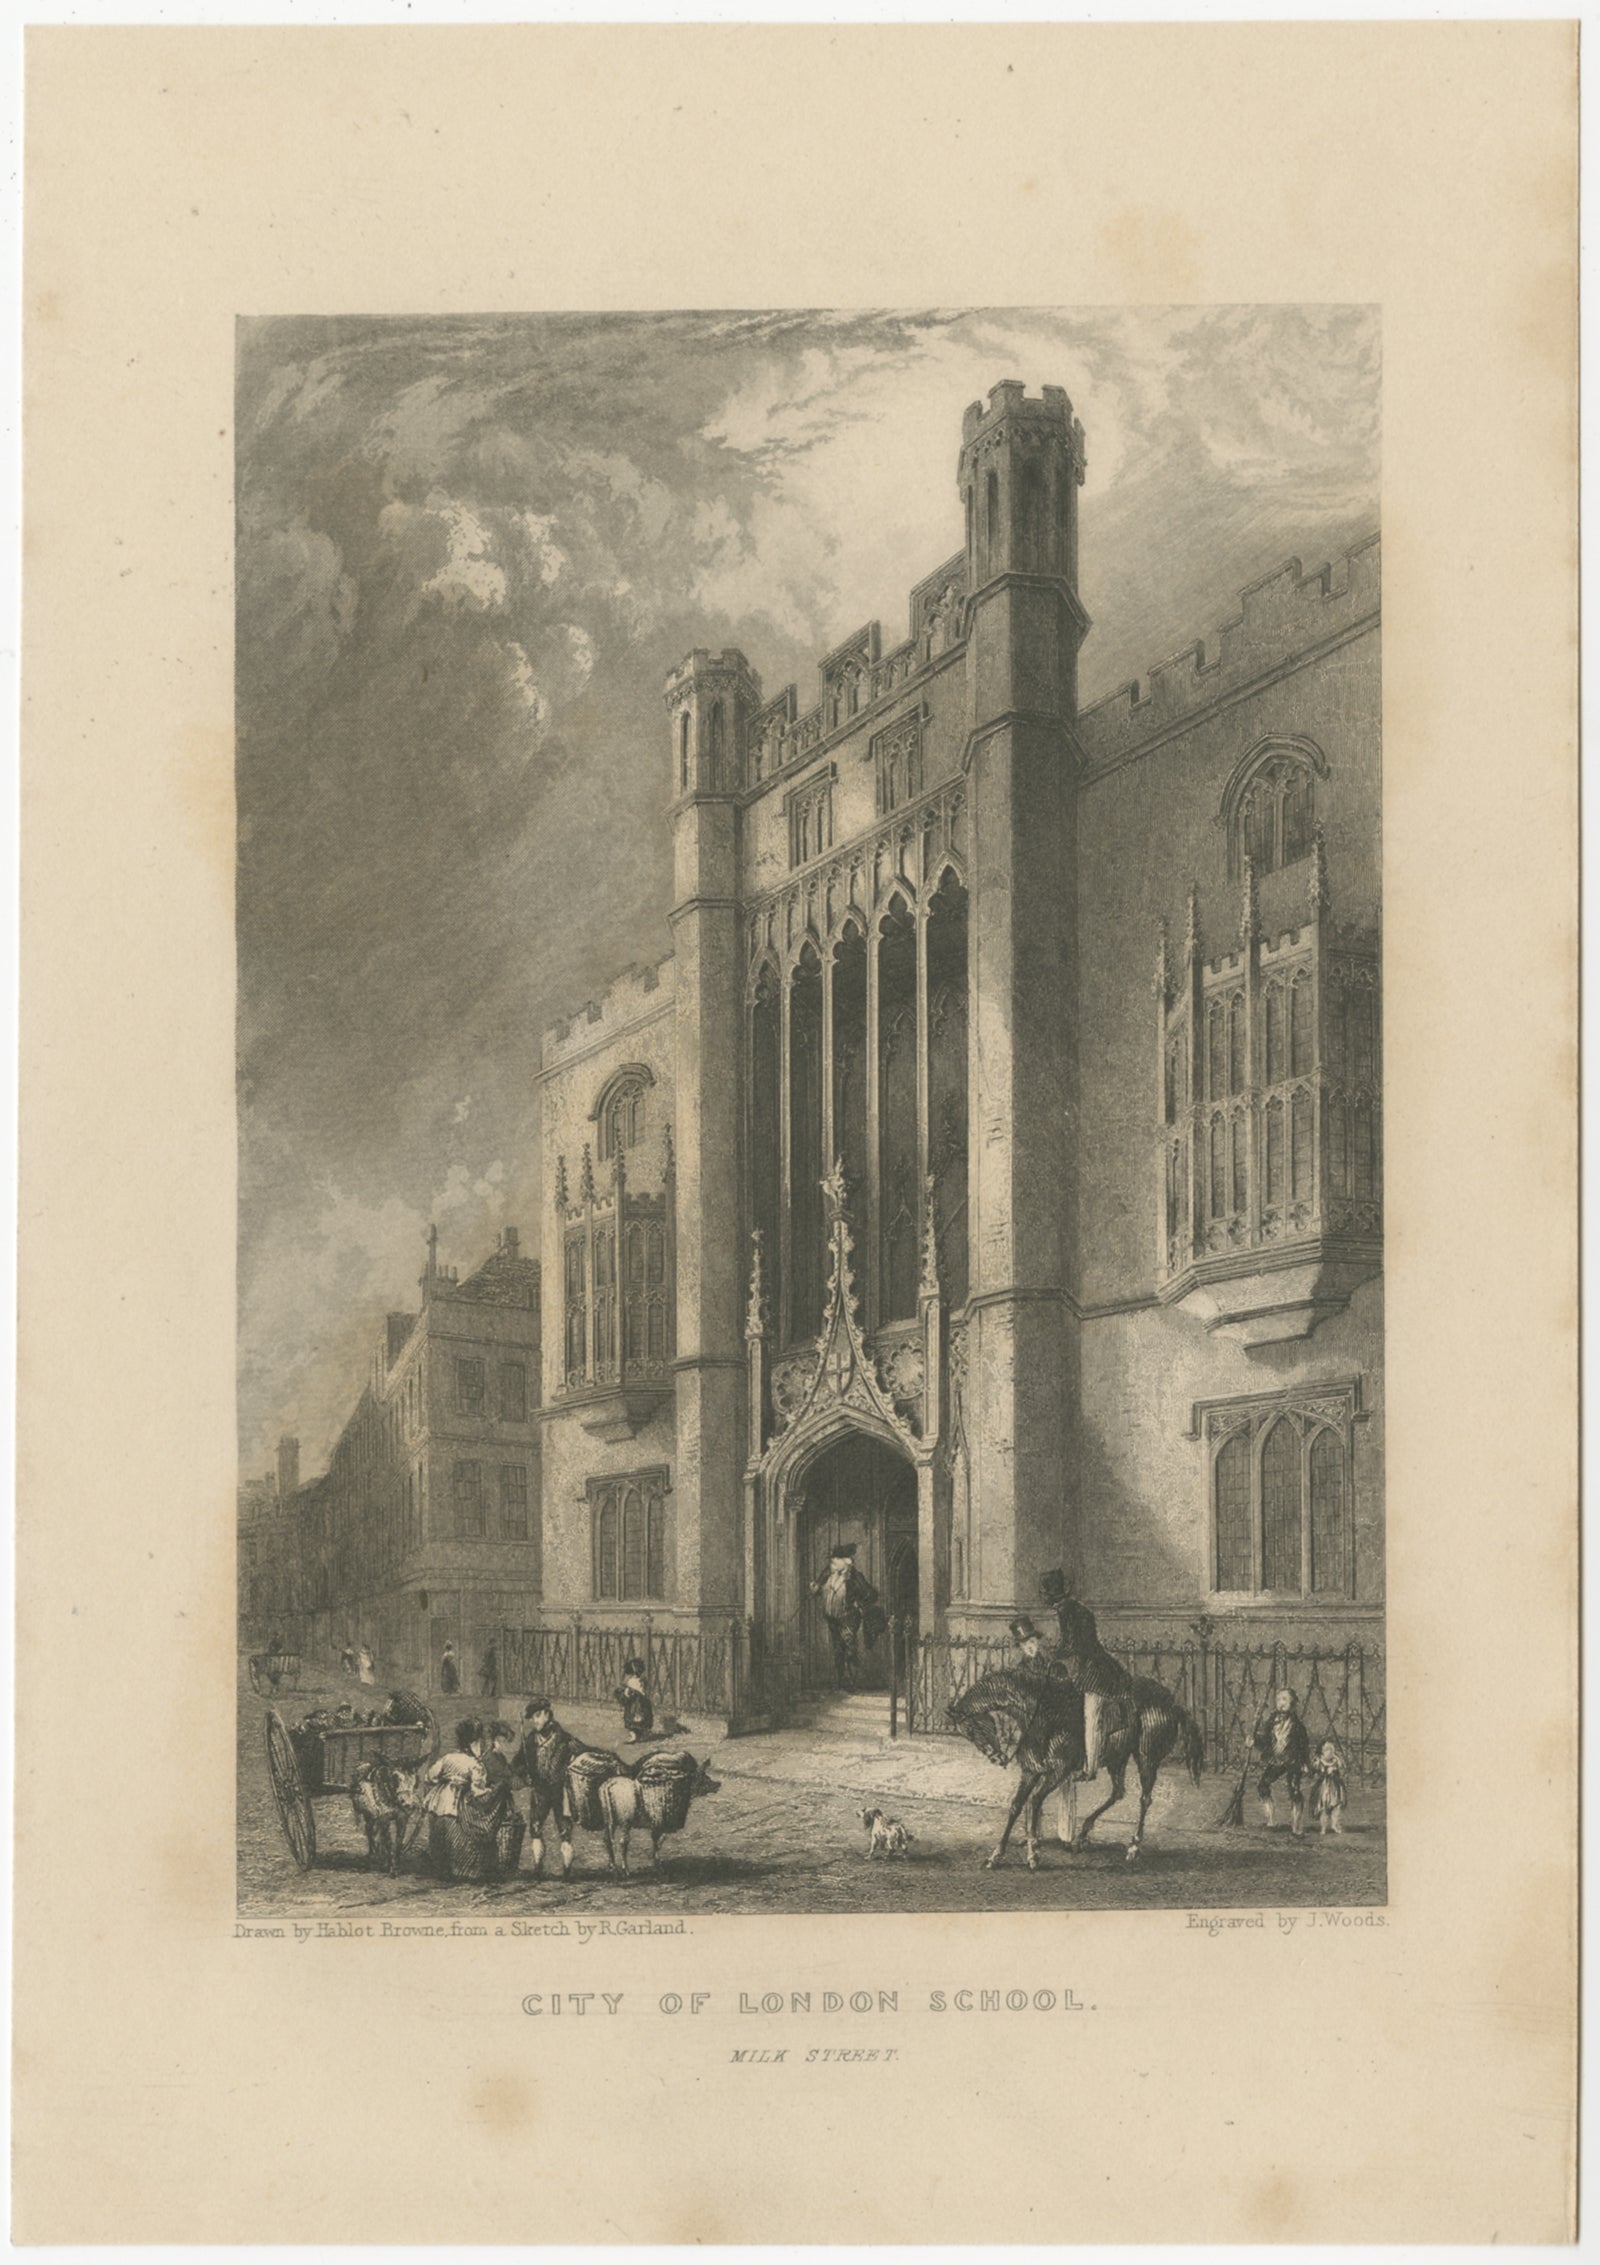 Antique print titled 'City of London School'. Steel engraved view of the City of London School, London, England. Source unknown, to be determined.

Artists and Engravers: Engraved by Woods after Browne. 

Condition: Good, general age-related